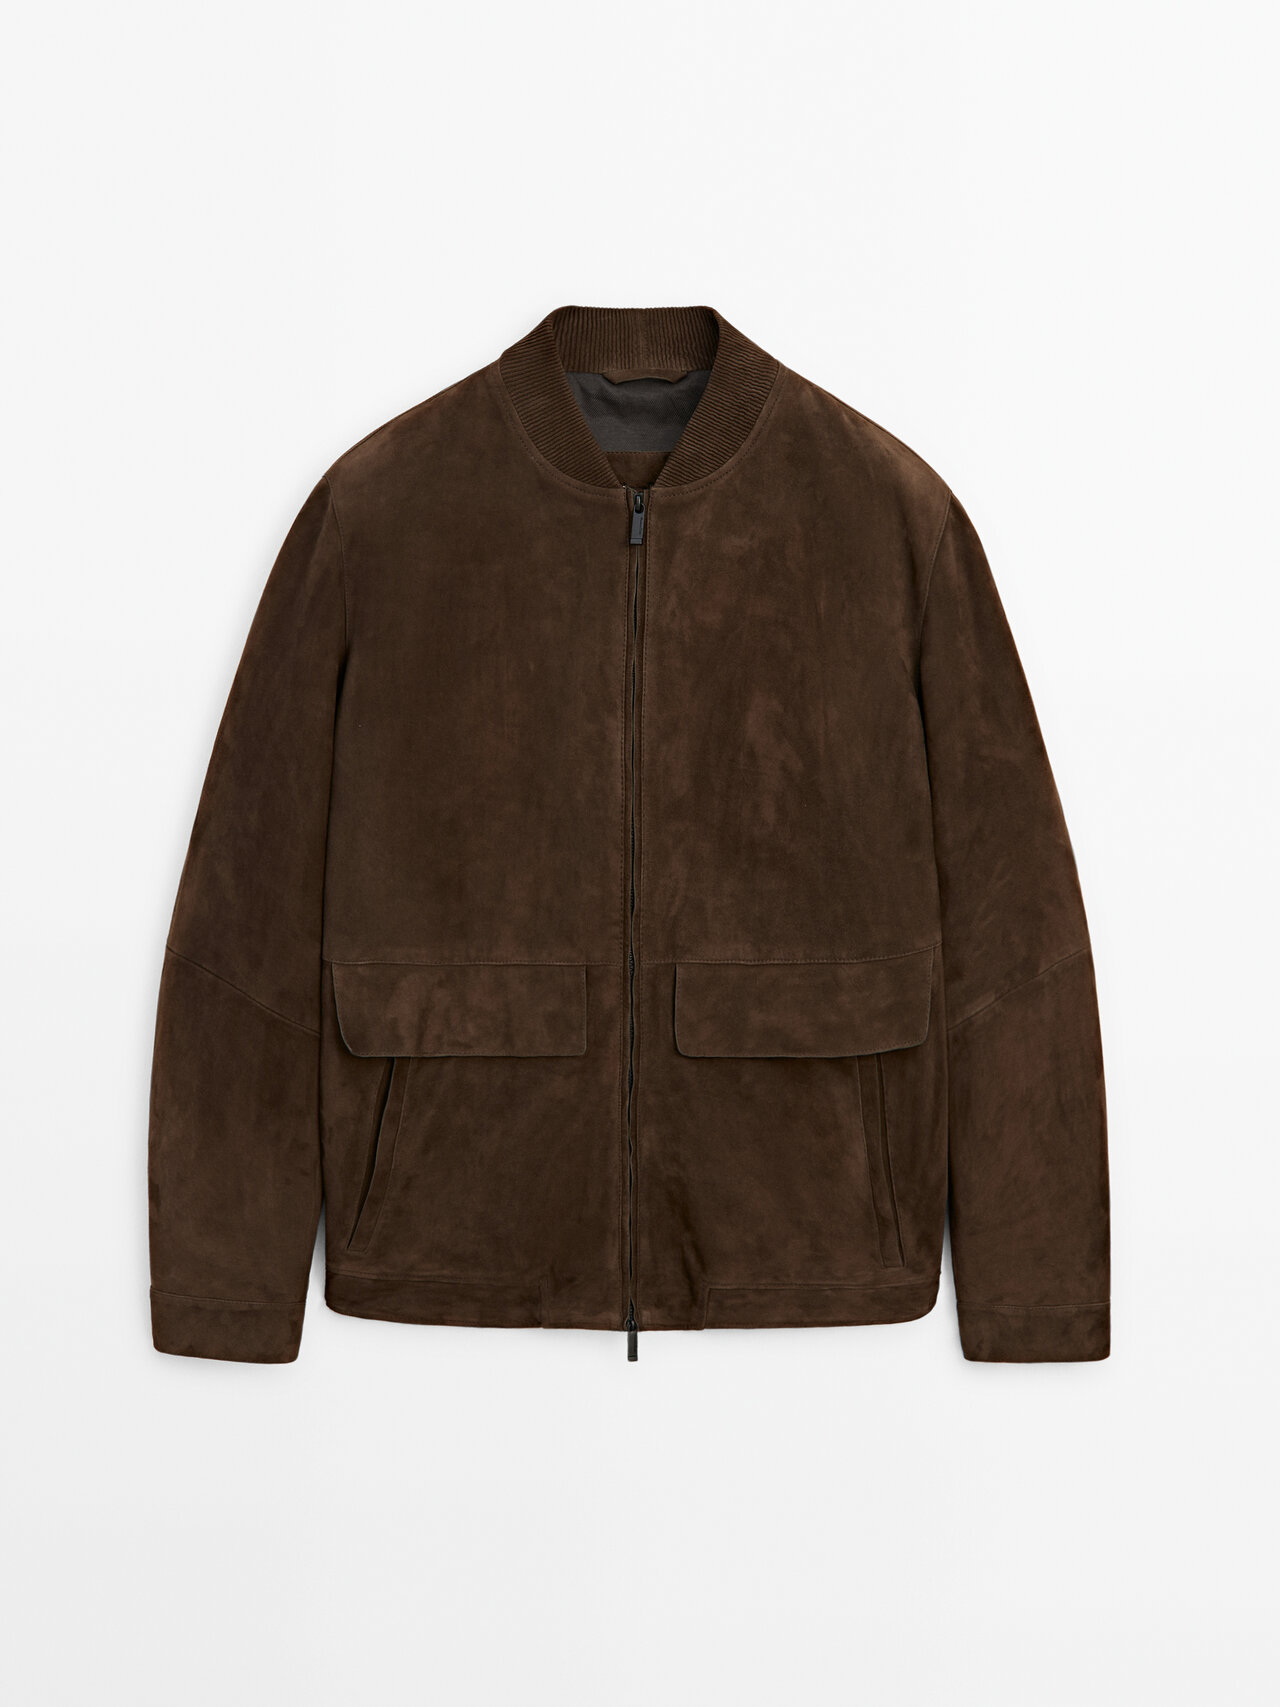 Massimo Dutti Suede Leather Bomber Jacket With Pockets In Chocolate